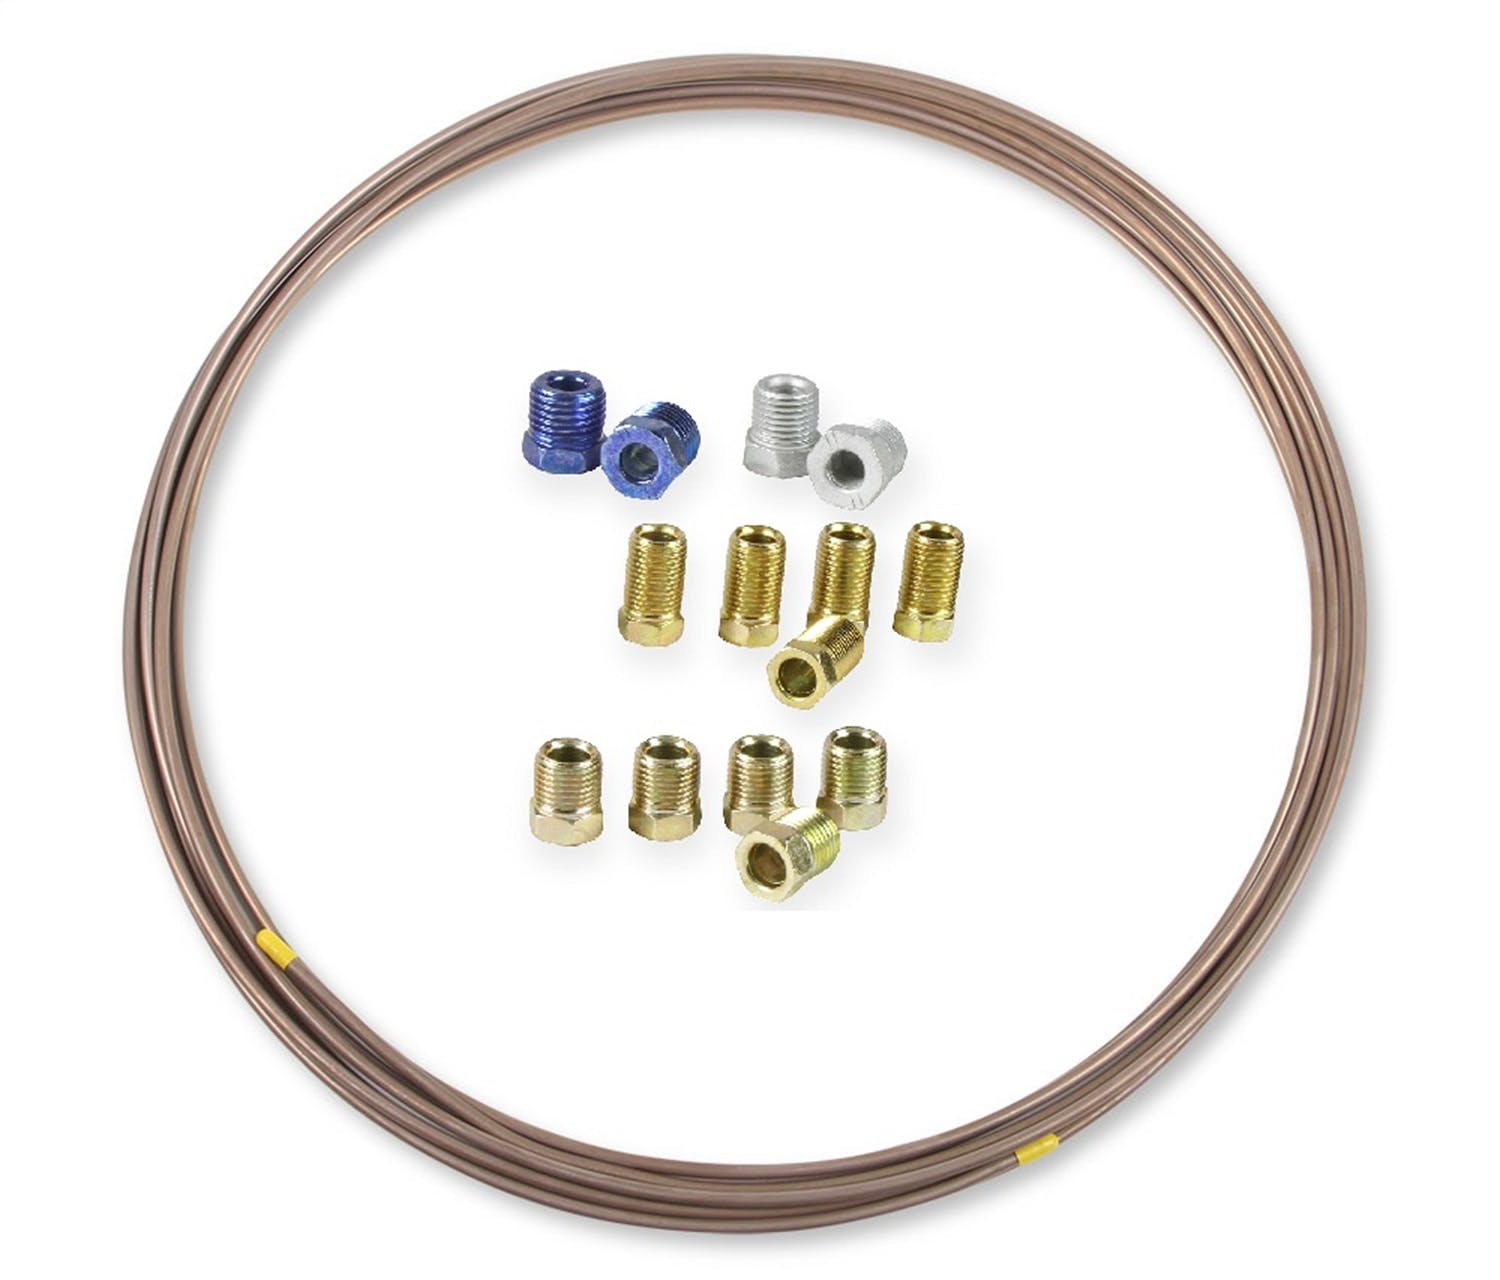 Earl's Performance Plumbing NC6416KERL 1/4 IN X 25 FT COIL and FITTING KIT EZFORM